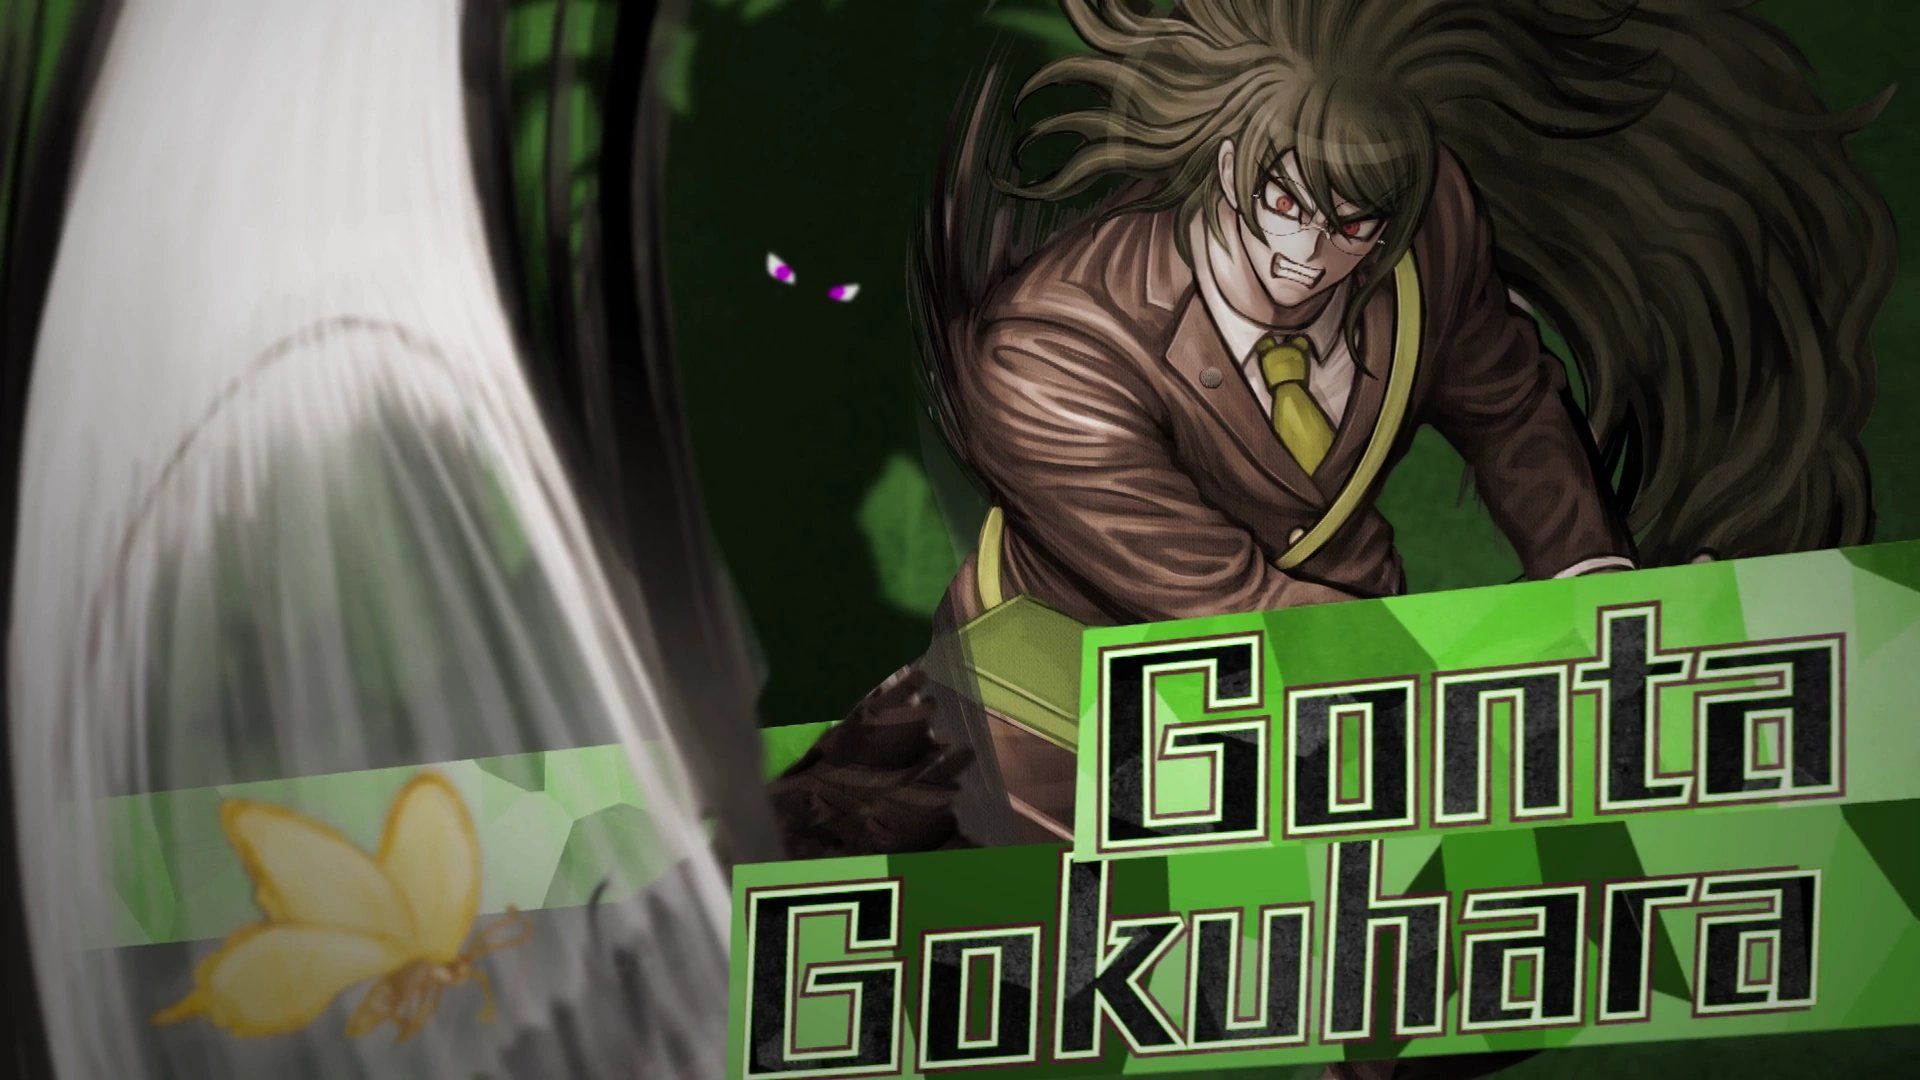 Hol Horse-¤ [Hiatus]. Gonta Gokuhara (Danganronpa v3) I was once in a DR phase. I haven't seen all of DRV but I almost instantly liked Gonta when I found